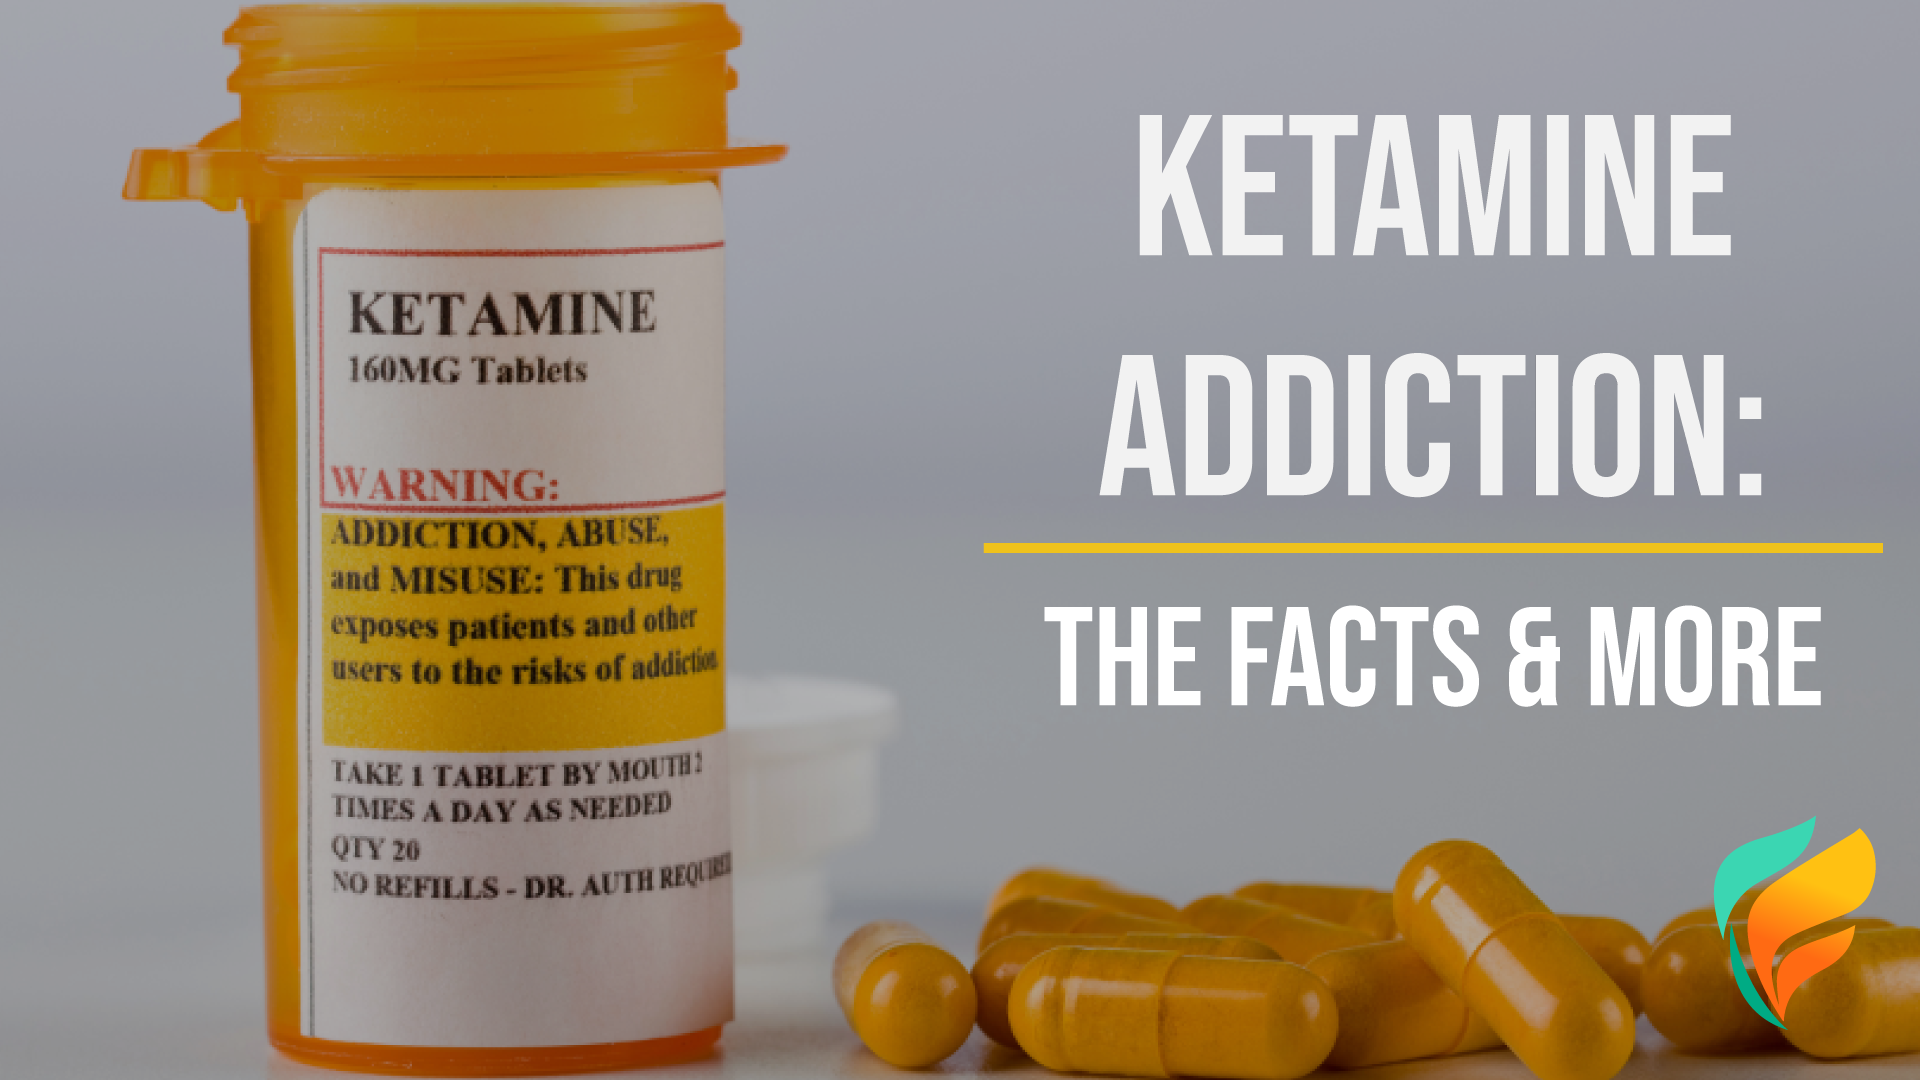 The Facts About Ketamine Addiction